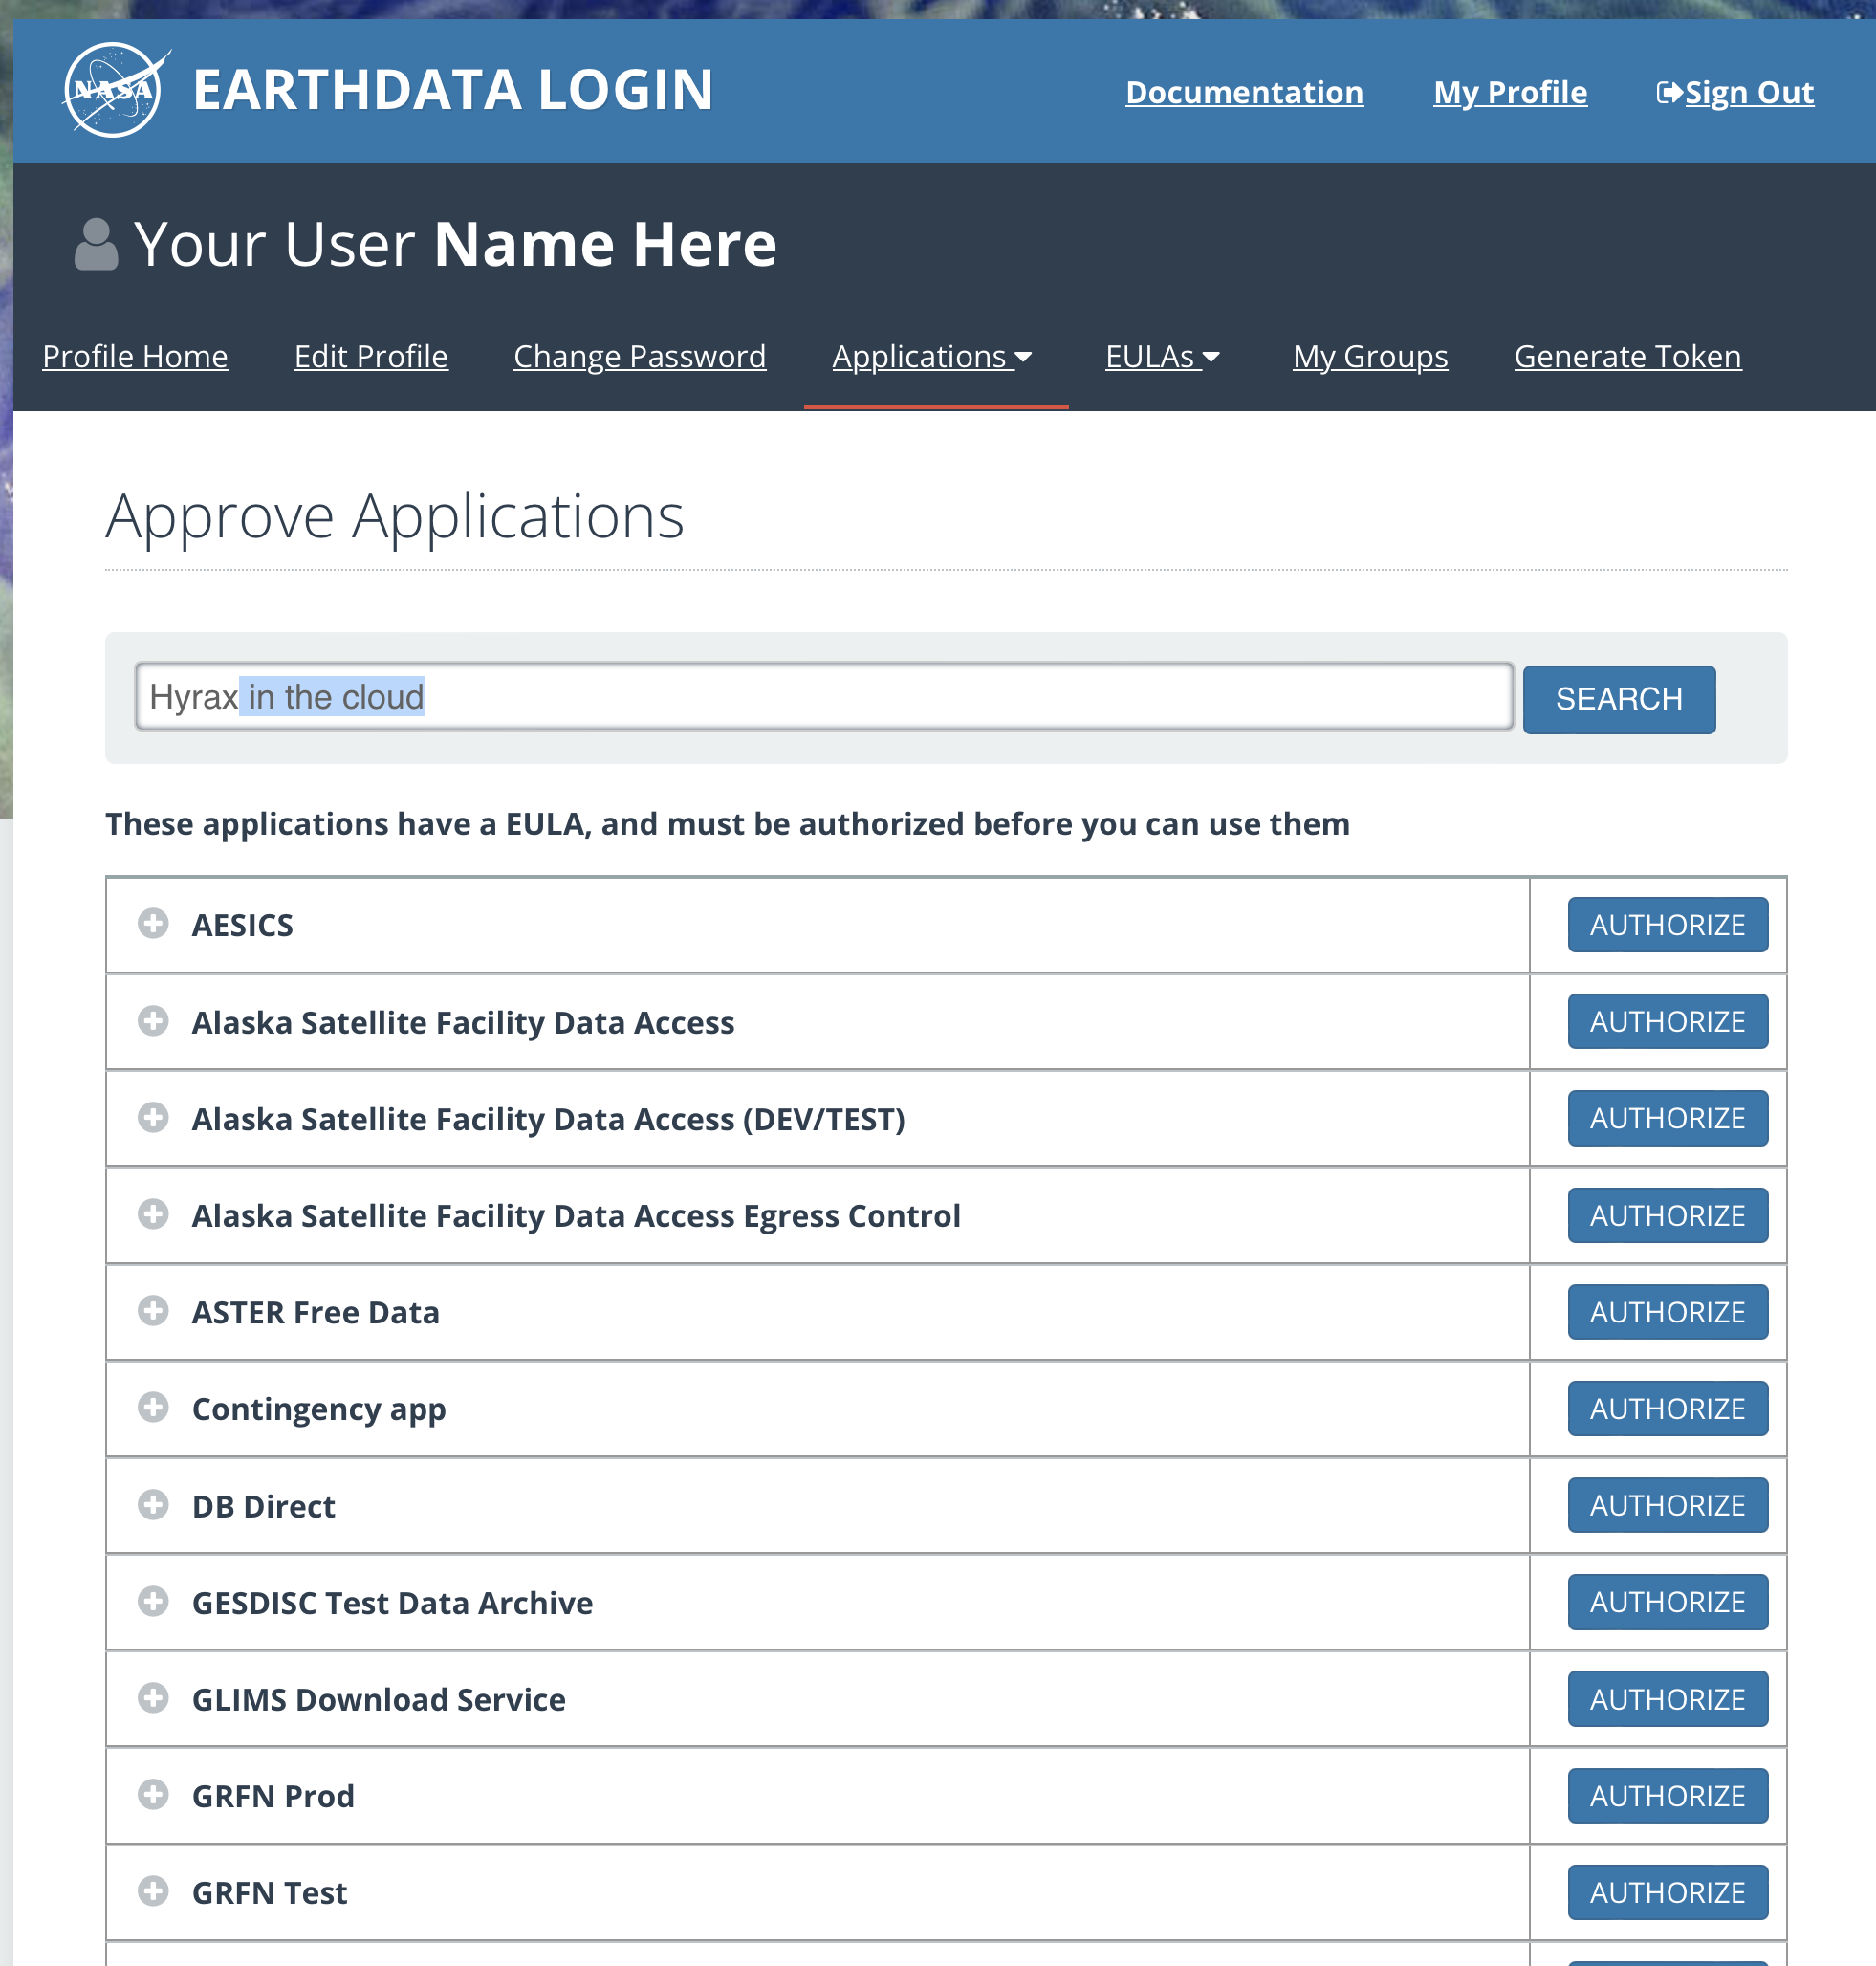 Earthdata Login Approve Applications Page